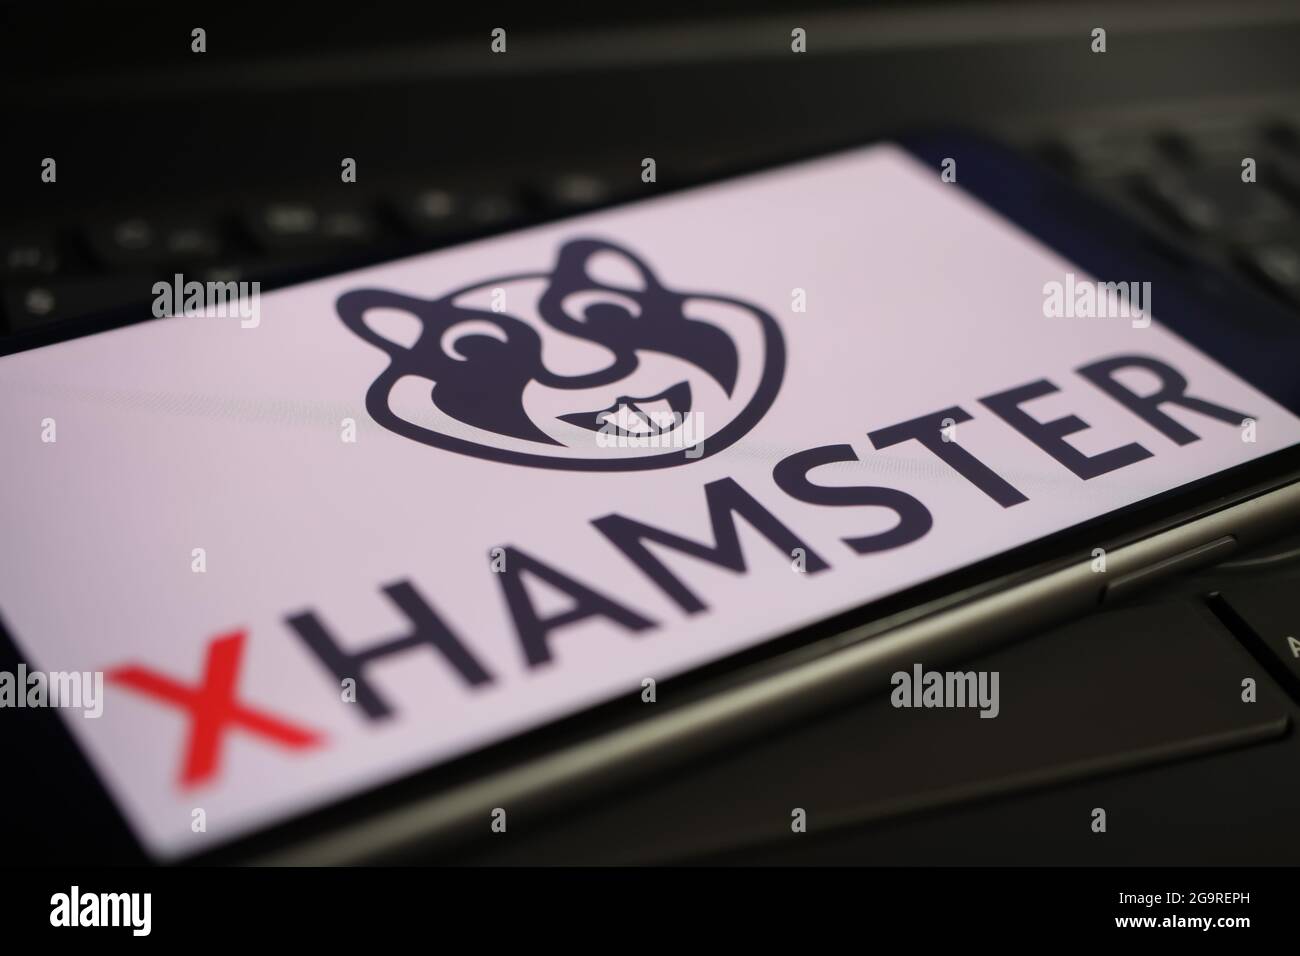 Viersen Germany June 1 2021 Closeup Of Mobile Phone Screen With Logo Lettering Of Xhamster